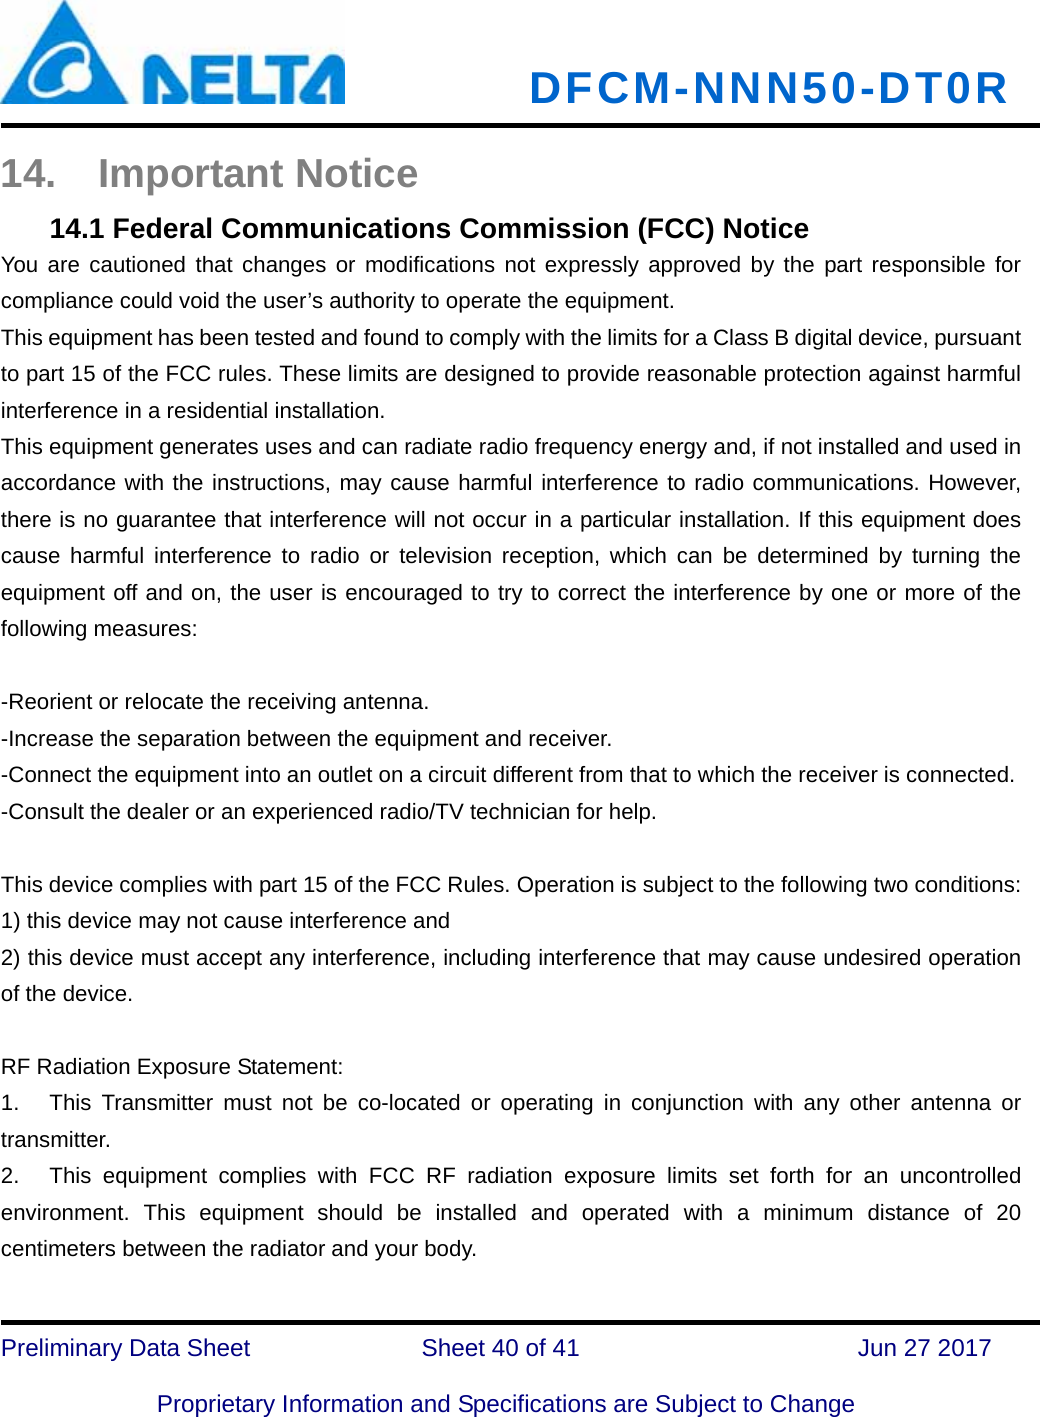   DFCM-NNN50-DT0R   Preliminary Data Sheet              Sheet 40 of 41      Jun 27 2017  Proprietary Information and Specifications are Subject to Change 14. Important Notice 14.1 Federal Communications Commission (FCC) Notice You are cautioned that changes or modifications not expressly approved by the part responsible for compliance could void the user’s authority to operate the equipment. This equipment has been tested and found to comply with the limits for a Class B digital device, pursuant to part 15 of the FCC rules. These limits are designed to provide reasonable protection against harmful interference in a residential installation. This equipment generates uses and can radiate radio frequency energy and, if not installed and used in accordance with the instructions, may cause harmful interference to radio communications. However, there is no guarantee that interference will not occur in a particular installation. If this equipment does cause harmful interference to radio or television reception, which can be determined by turning the equipment off and on, the user is encouraged to try to correct the interference by one or more of the following measures:  -Reorient or relocate the receiving antenna. -Increase the separation between the equipment and receiver. -Connect the equipment into an outlet on a circuit different from that to which the receiver is connected. -Consult the dealer or an experienced radio/TV technician for help.  This device complies with part 15 of the FCC Rules. Operation is subject to the following two conditions:   1) this device may not cause interference and 2) this device must accept any interference, including interference that may cause undesired operation of the device.  RF Radiation Exposure Statement: 1.  This Transmitter must not be co-located or operating in conjunction with any other antenna or transmitter. 2.  This equipment complies with FCC RF radiation exposure limits set forth for an uncontrolled environment. This equipment should be installed and operated with a minimum distance of 20 centimeters between the radiator and your body.  